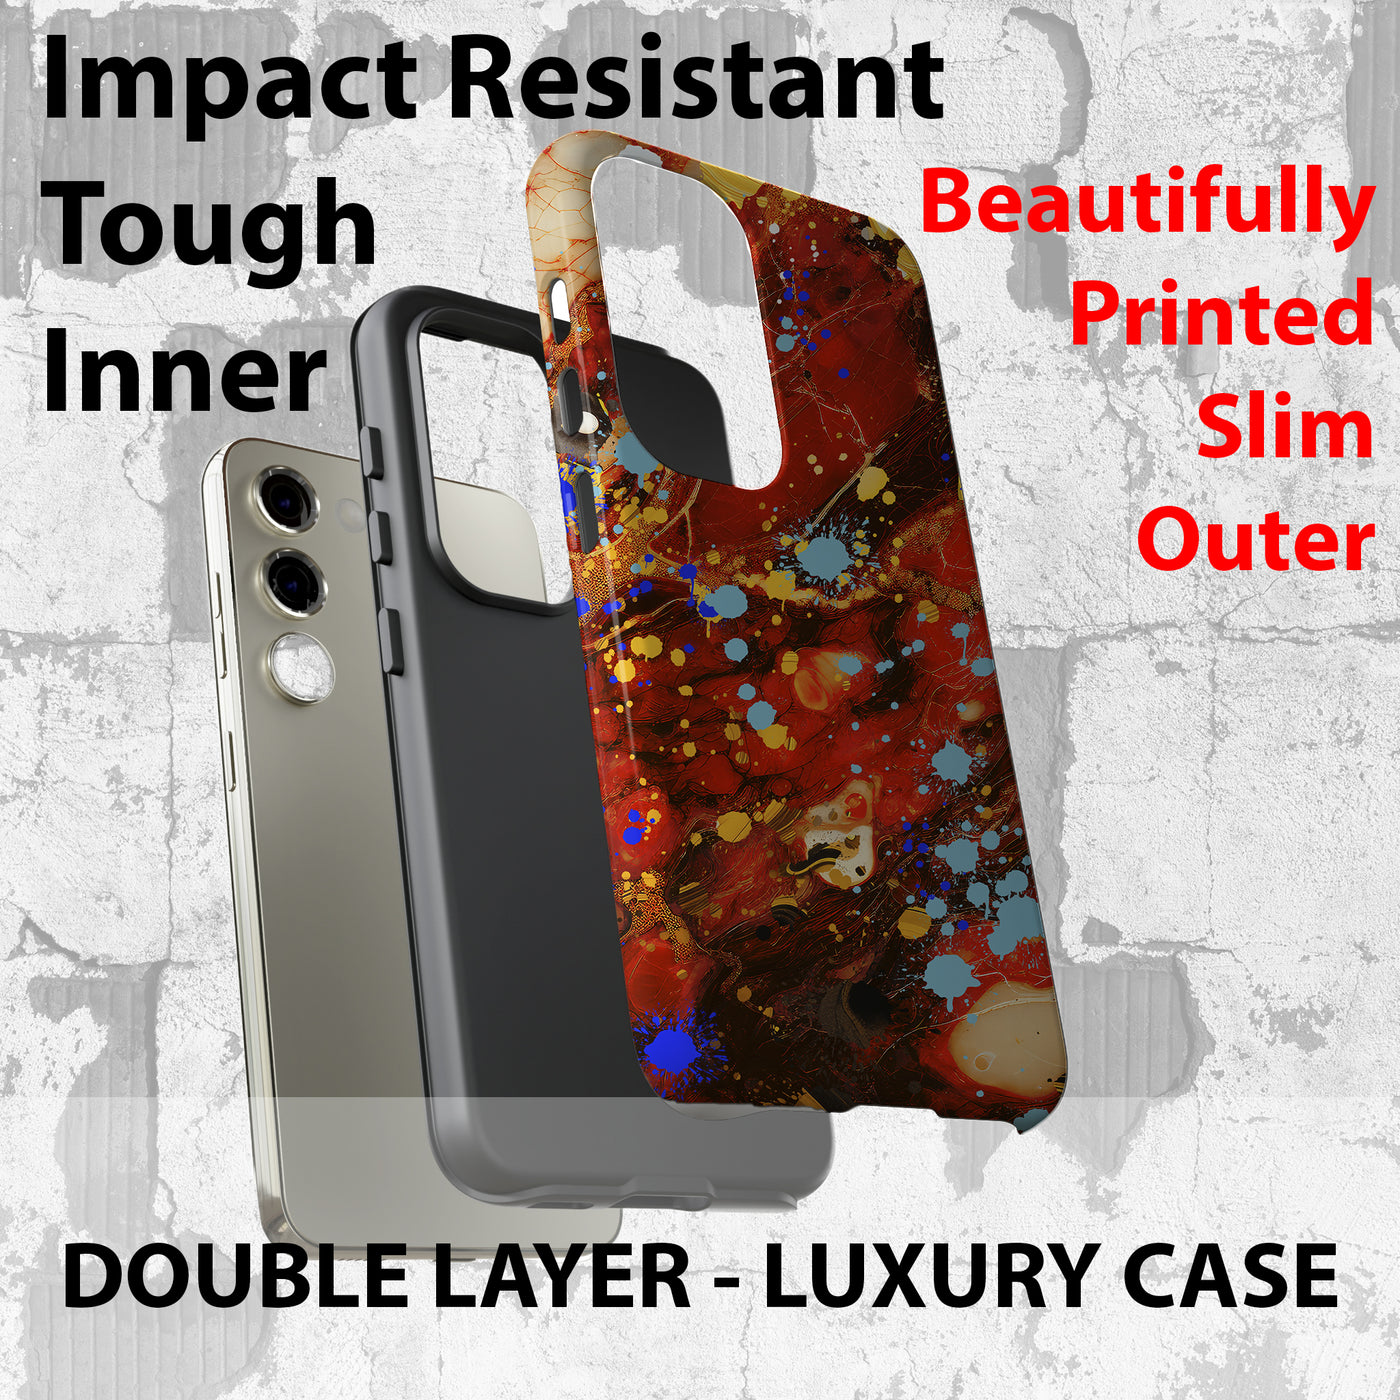 Samsung Galaxy Phone Case | Galaxy S23, S22, S21, S20 | Luxury Case Double Layered | Impact Resistant | Fashionable - PaintBlots 6